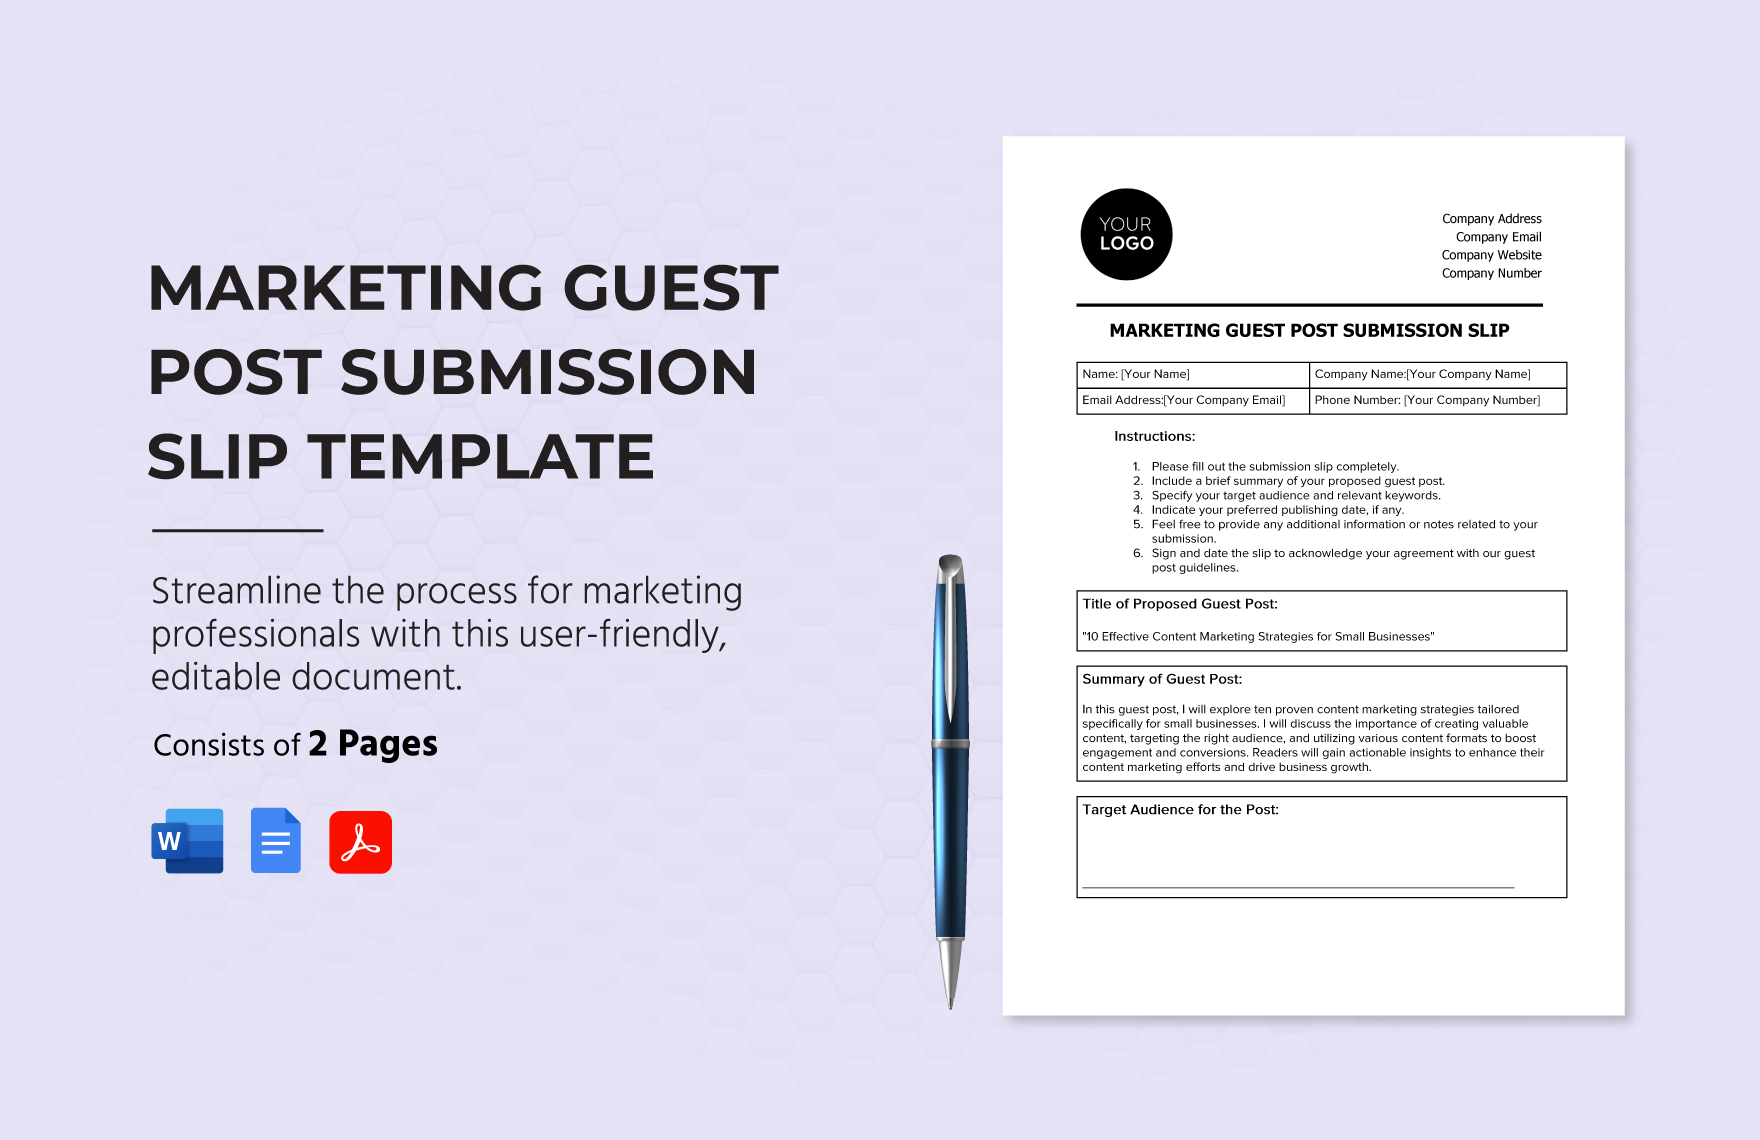 Marketing Guest Post Submission Slip Template in Word, Google Docs, PDF